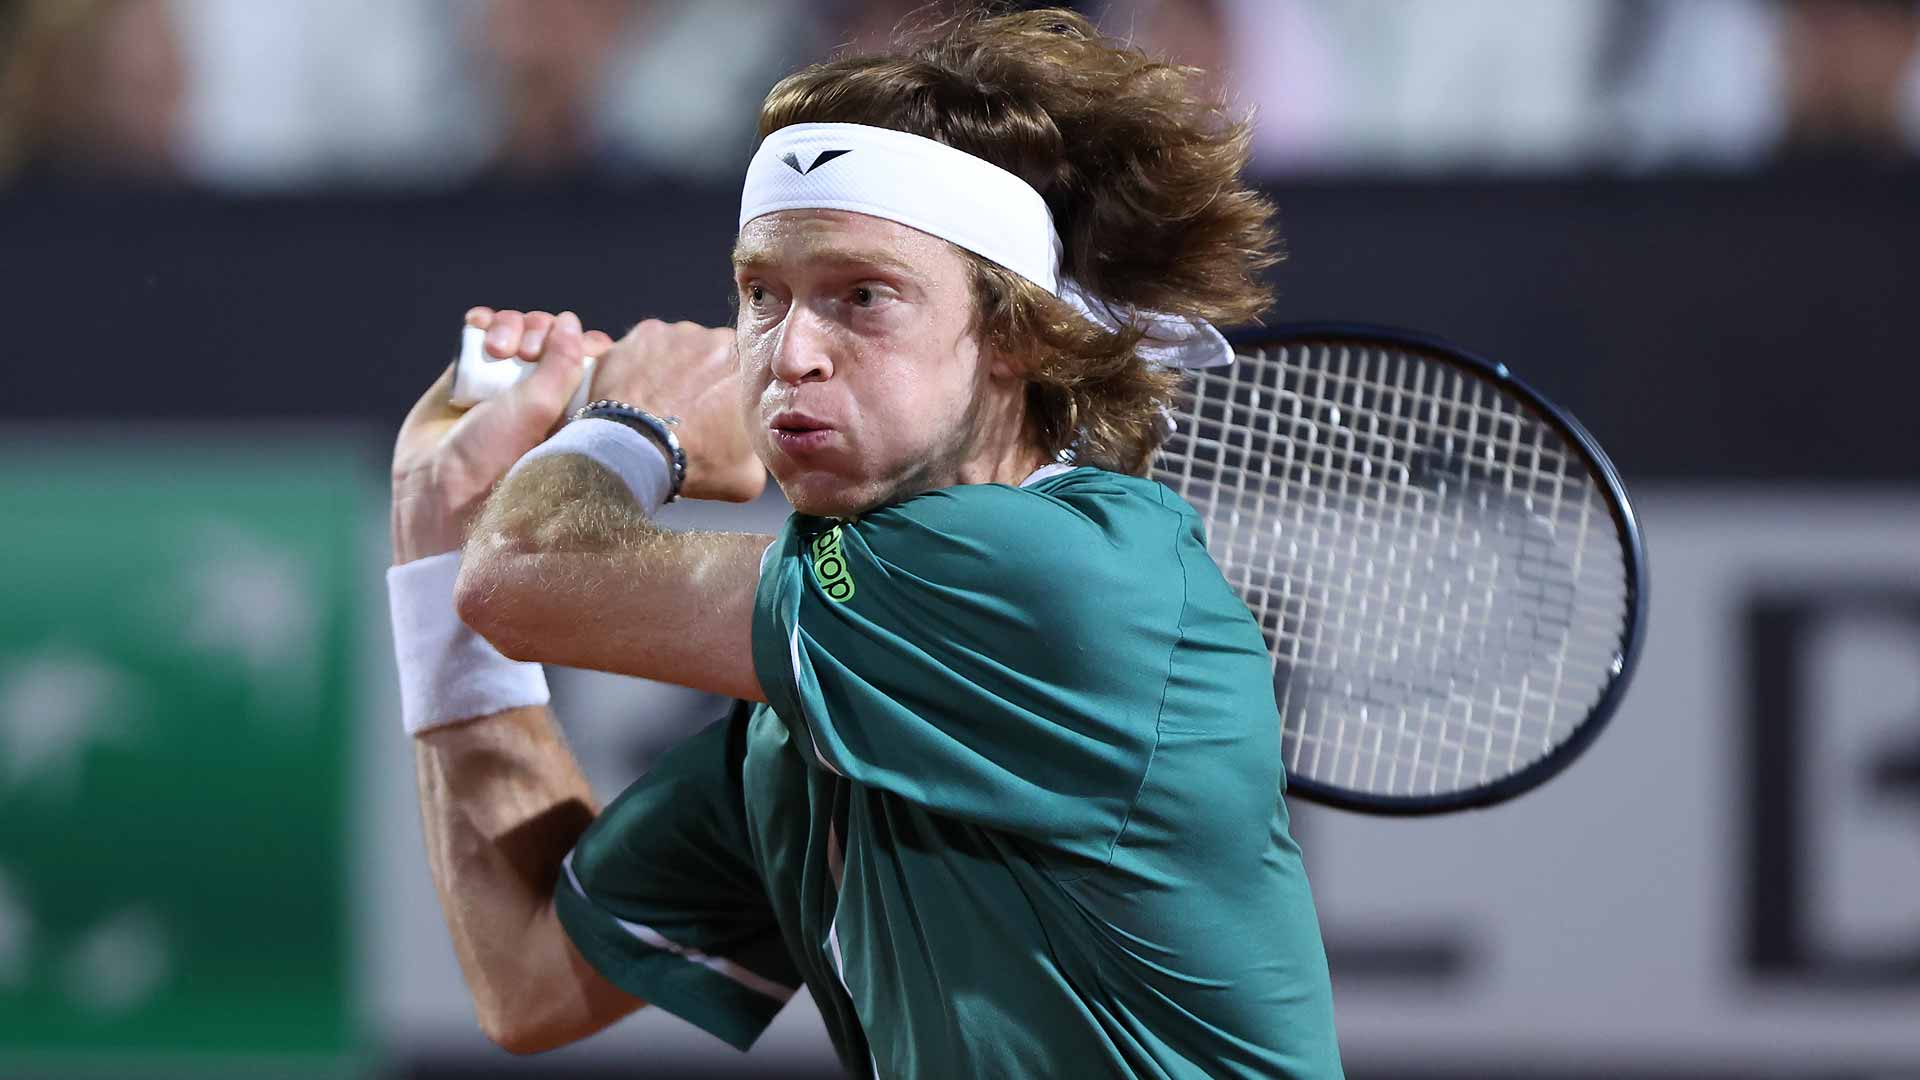 Madrid champ Rublev survives opening Rome test